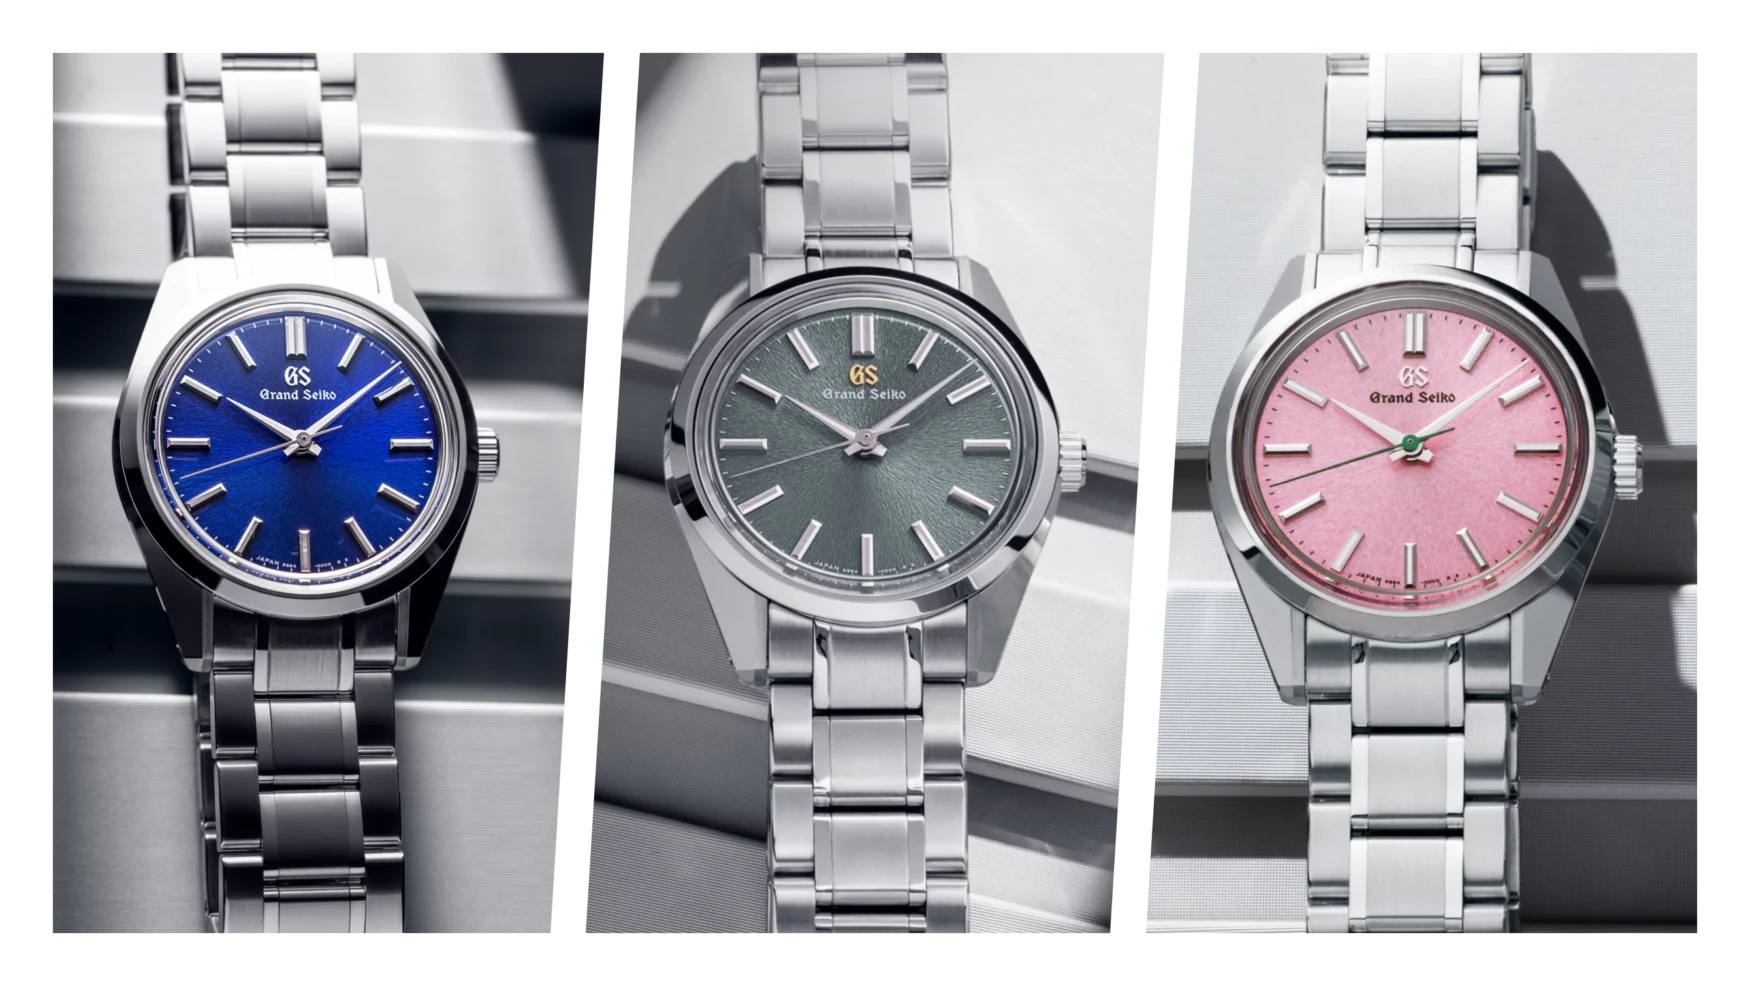 The Grand Seiko 36.5mm 44GS range expands with three new U.S. exclusive references (SBGW309, SBGW311, SBGW313)